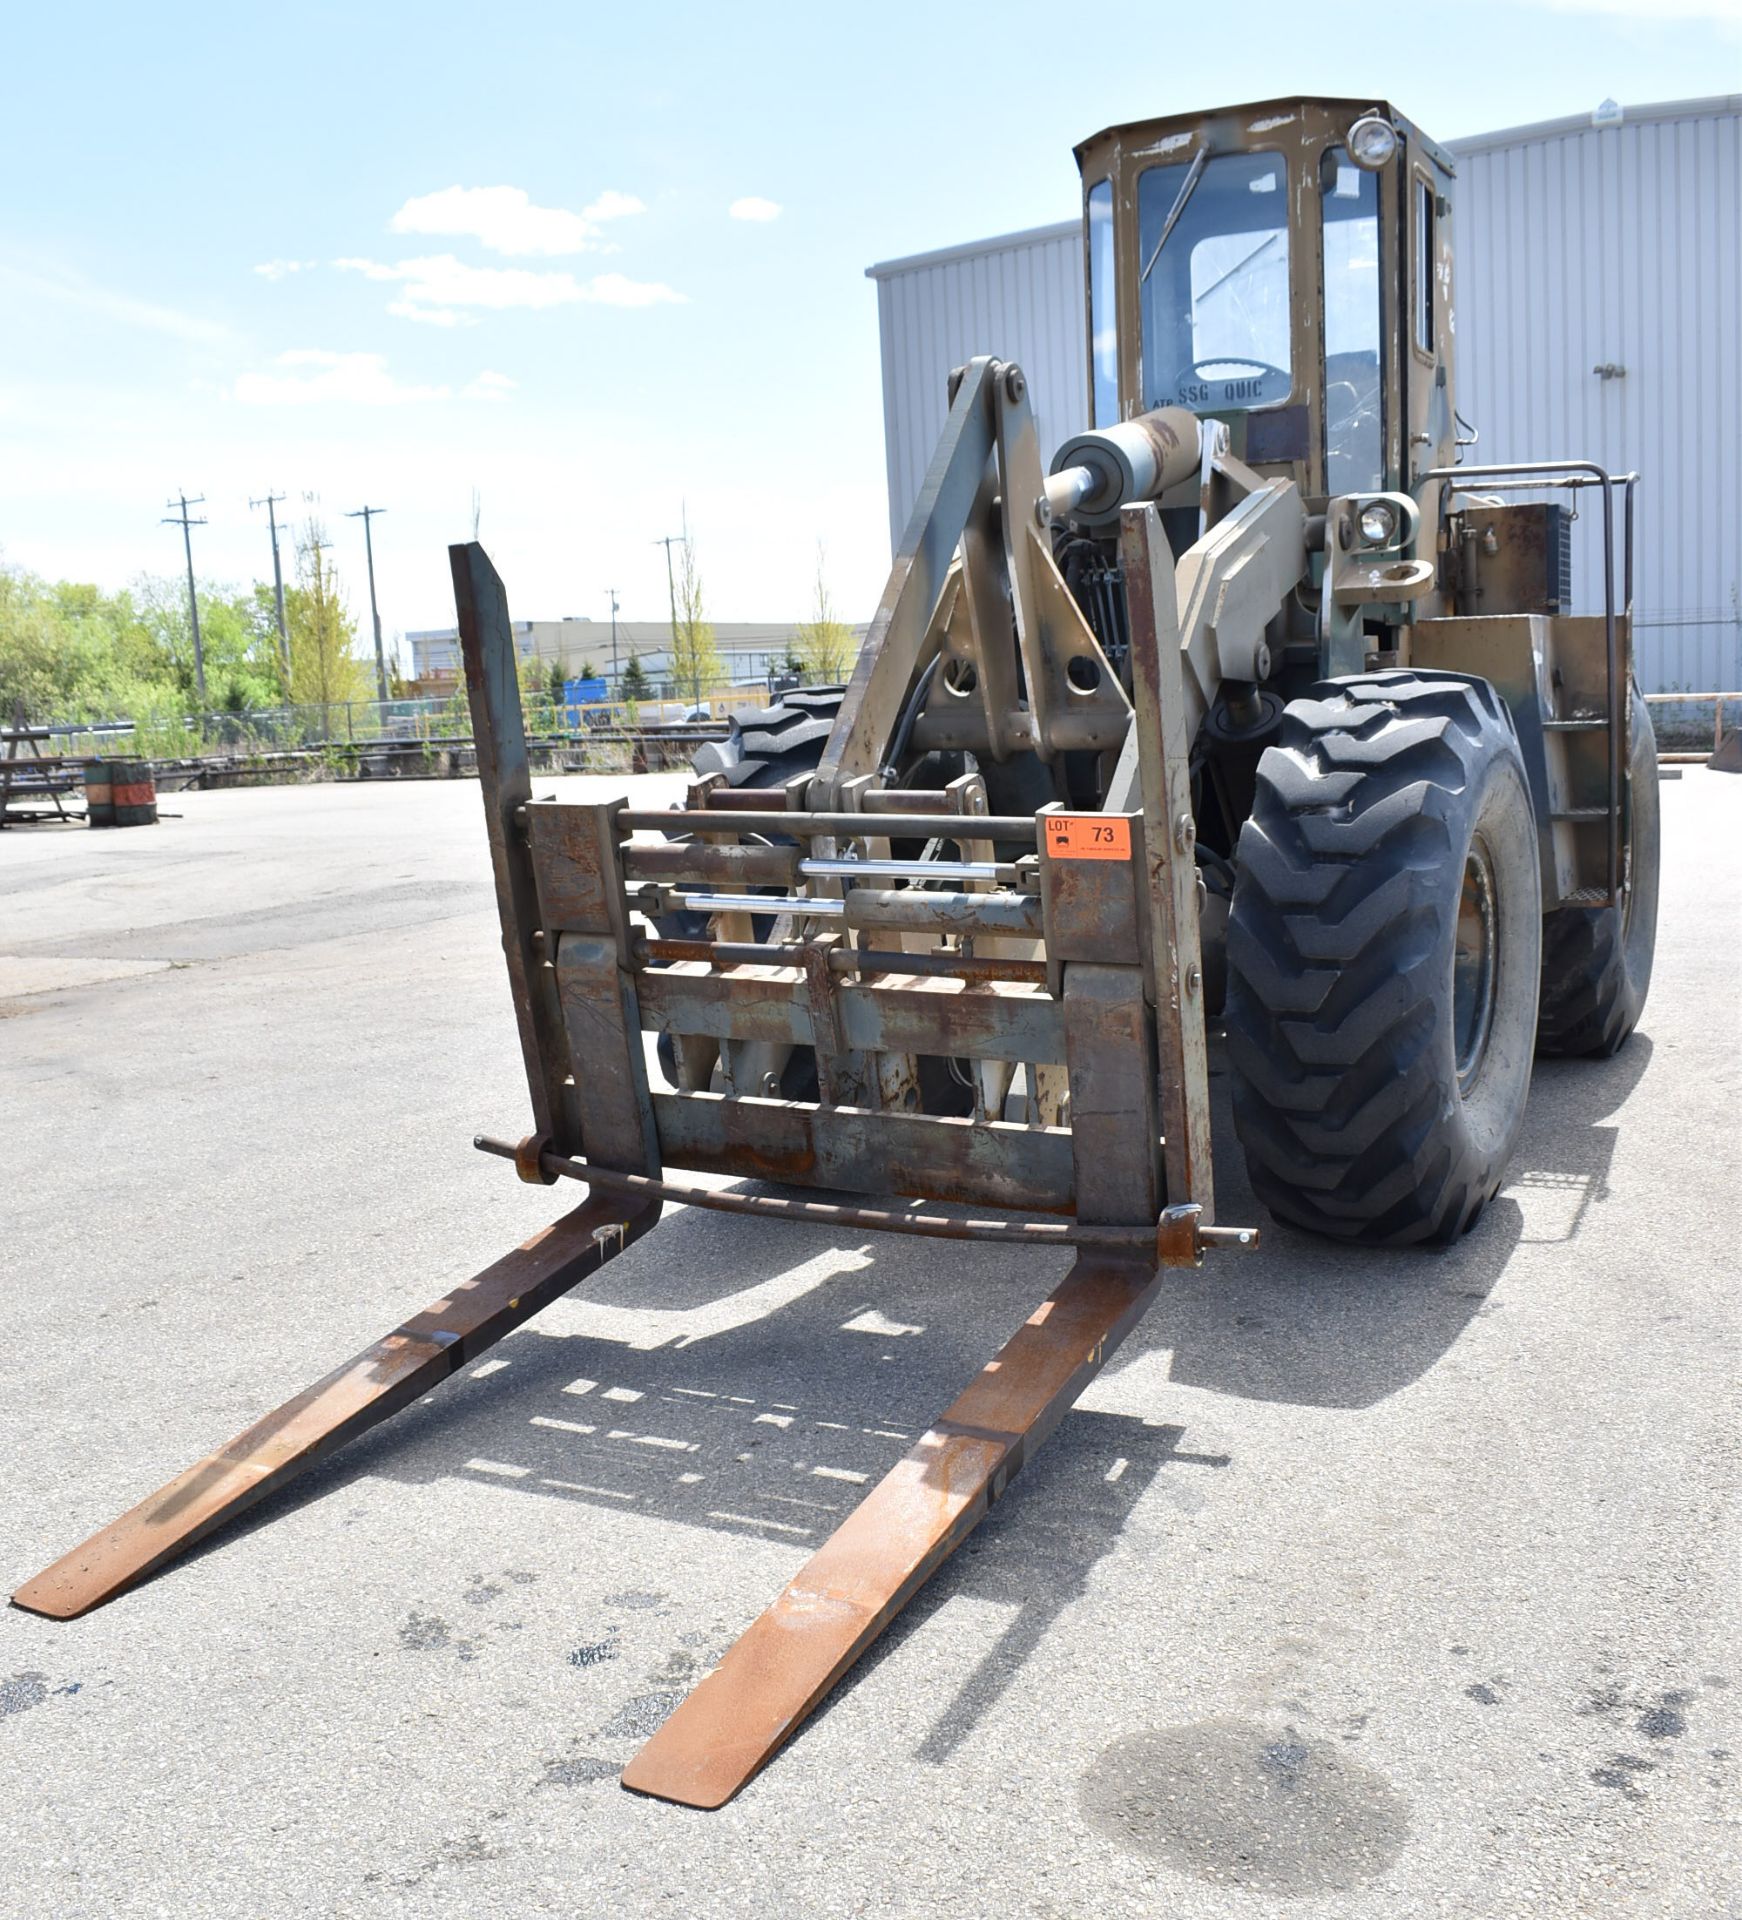 WINNDOM 201-1283 12,000LBS. CAPACITY ARTICULATING FRONT END LOADER WITH DETROIT DIESEL ENGINE, - Image 2 of 19